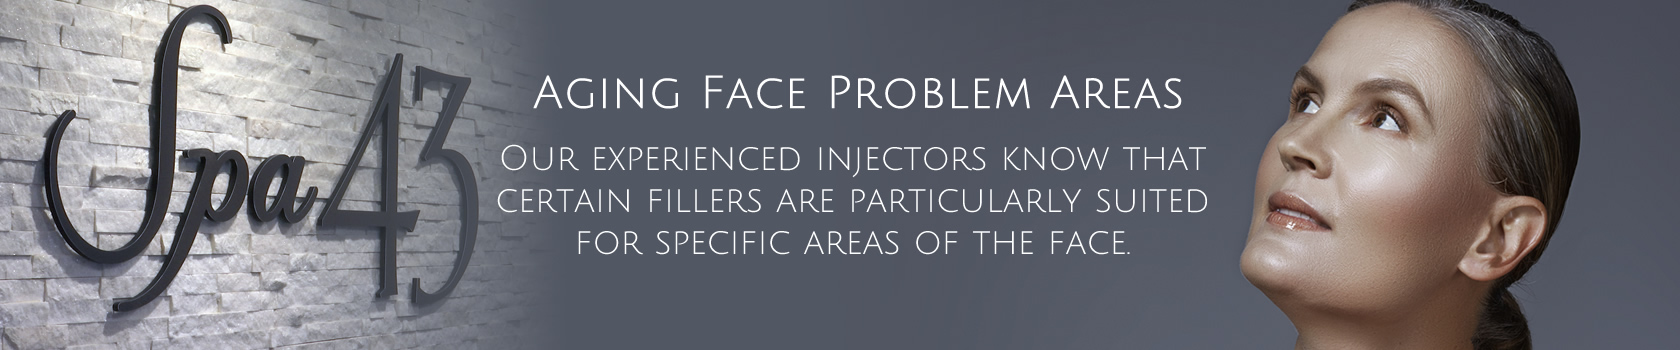 Aging Face Problems Areas